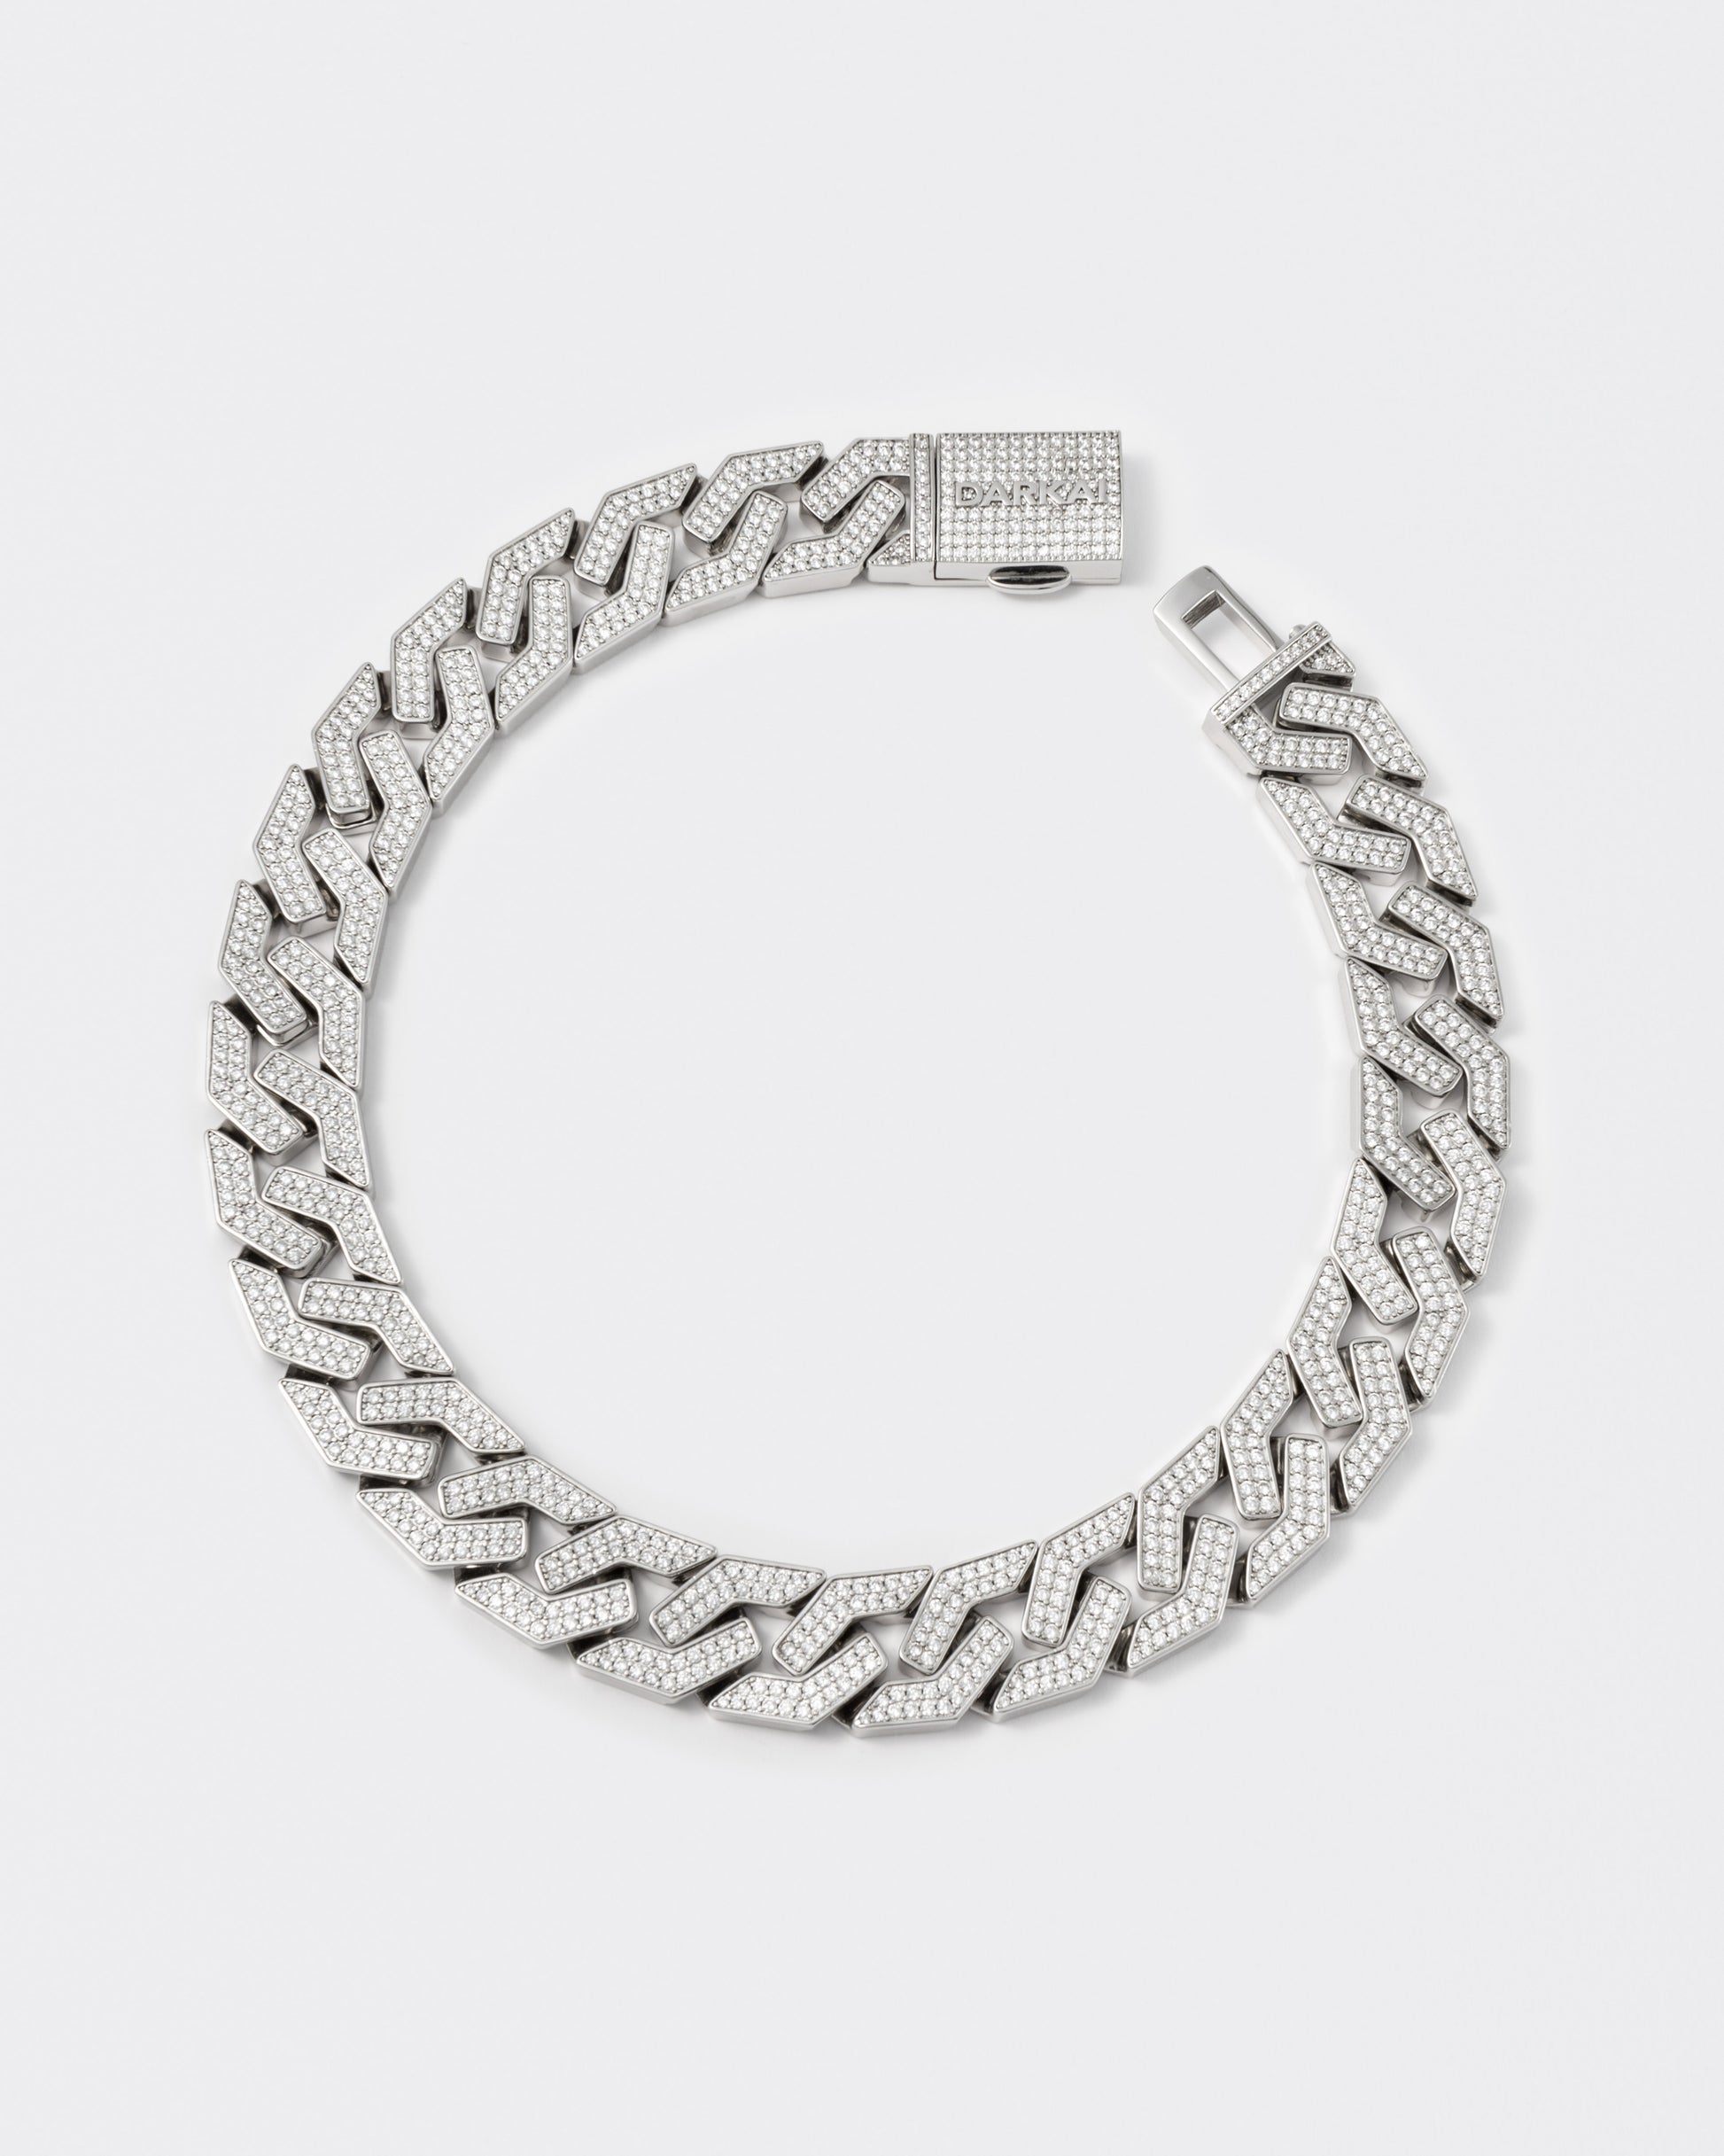 oversize prong chain necklace with 18kt white gold coating and hand-set micropavé stones in diamond white. Fine jewelry grade drawer closure with logo